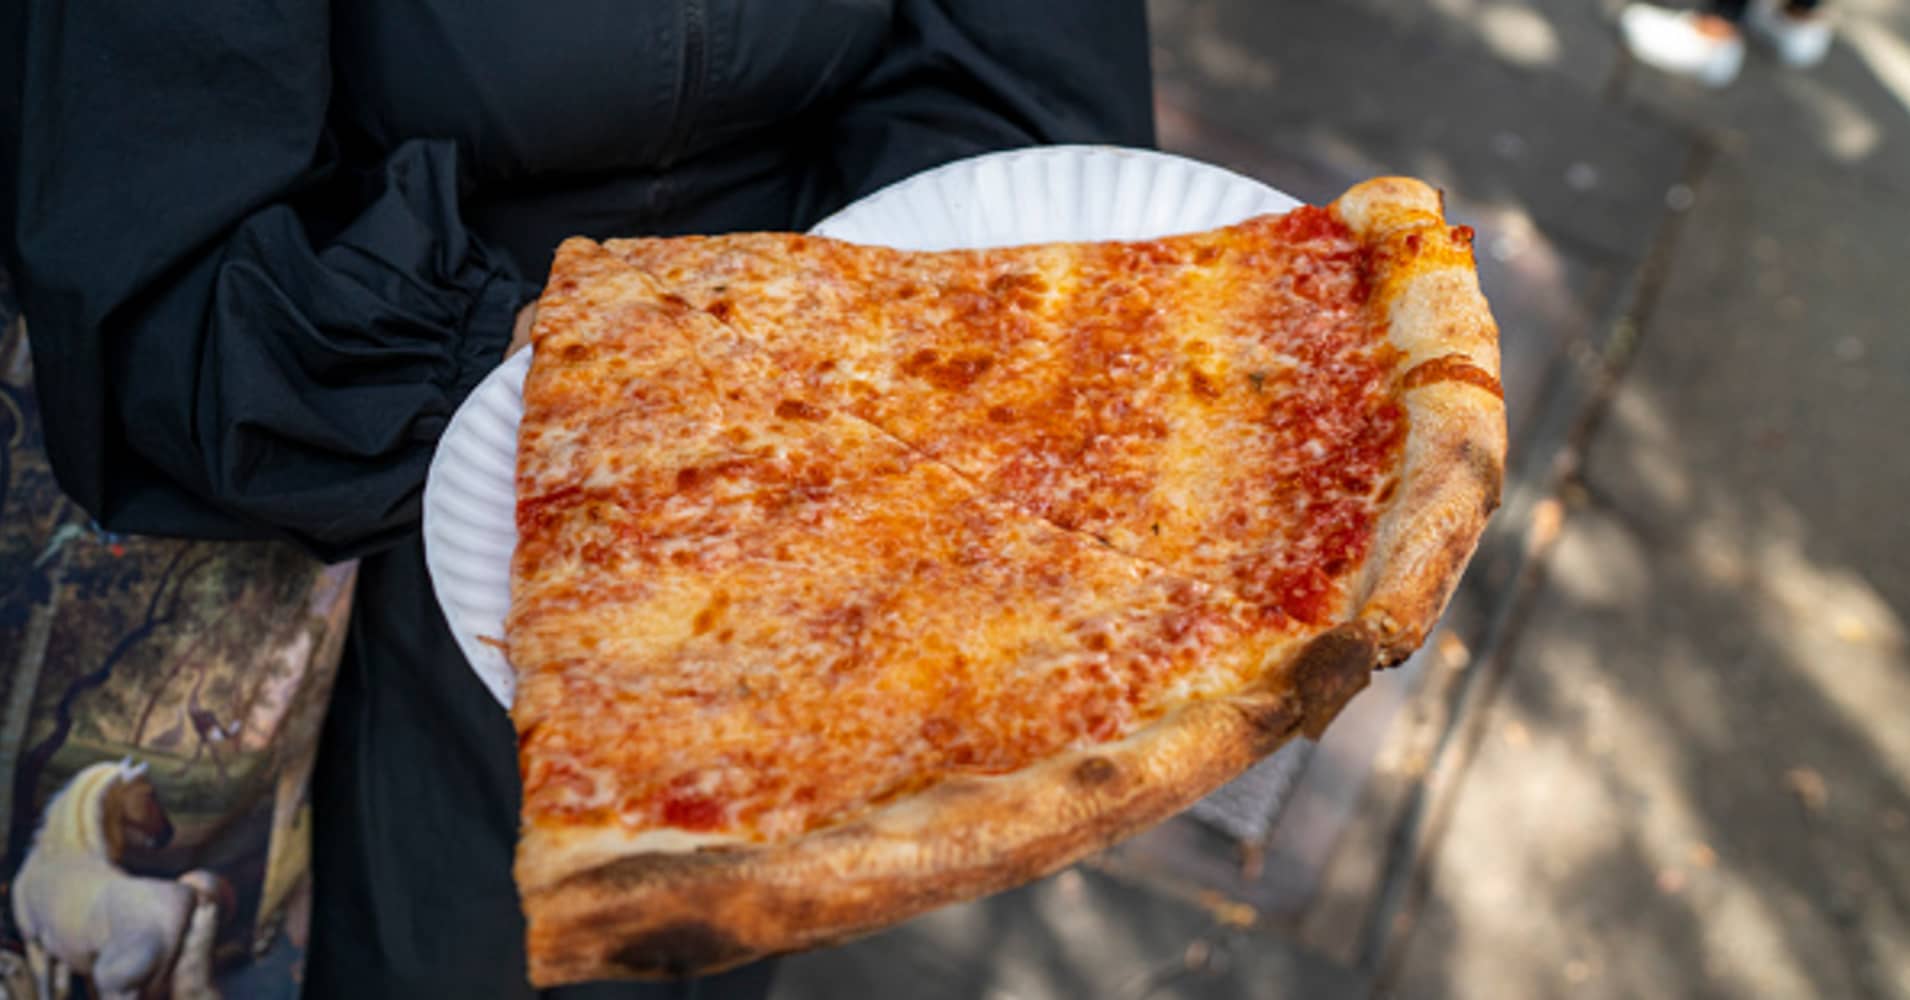 new york city has the nation's most expensive pizza—here's how your city stacks up